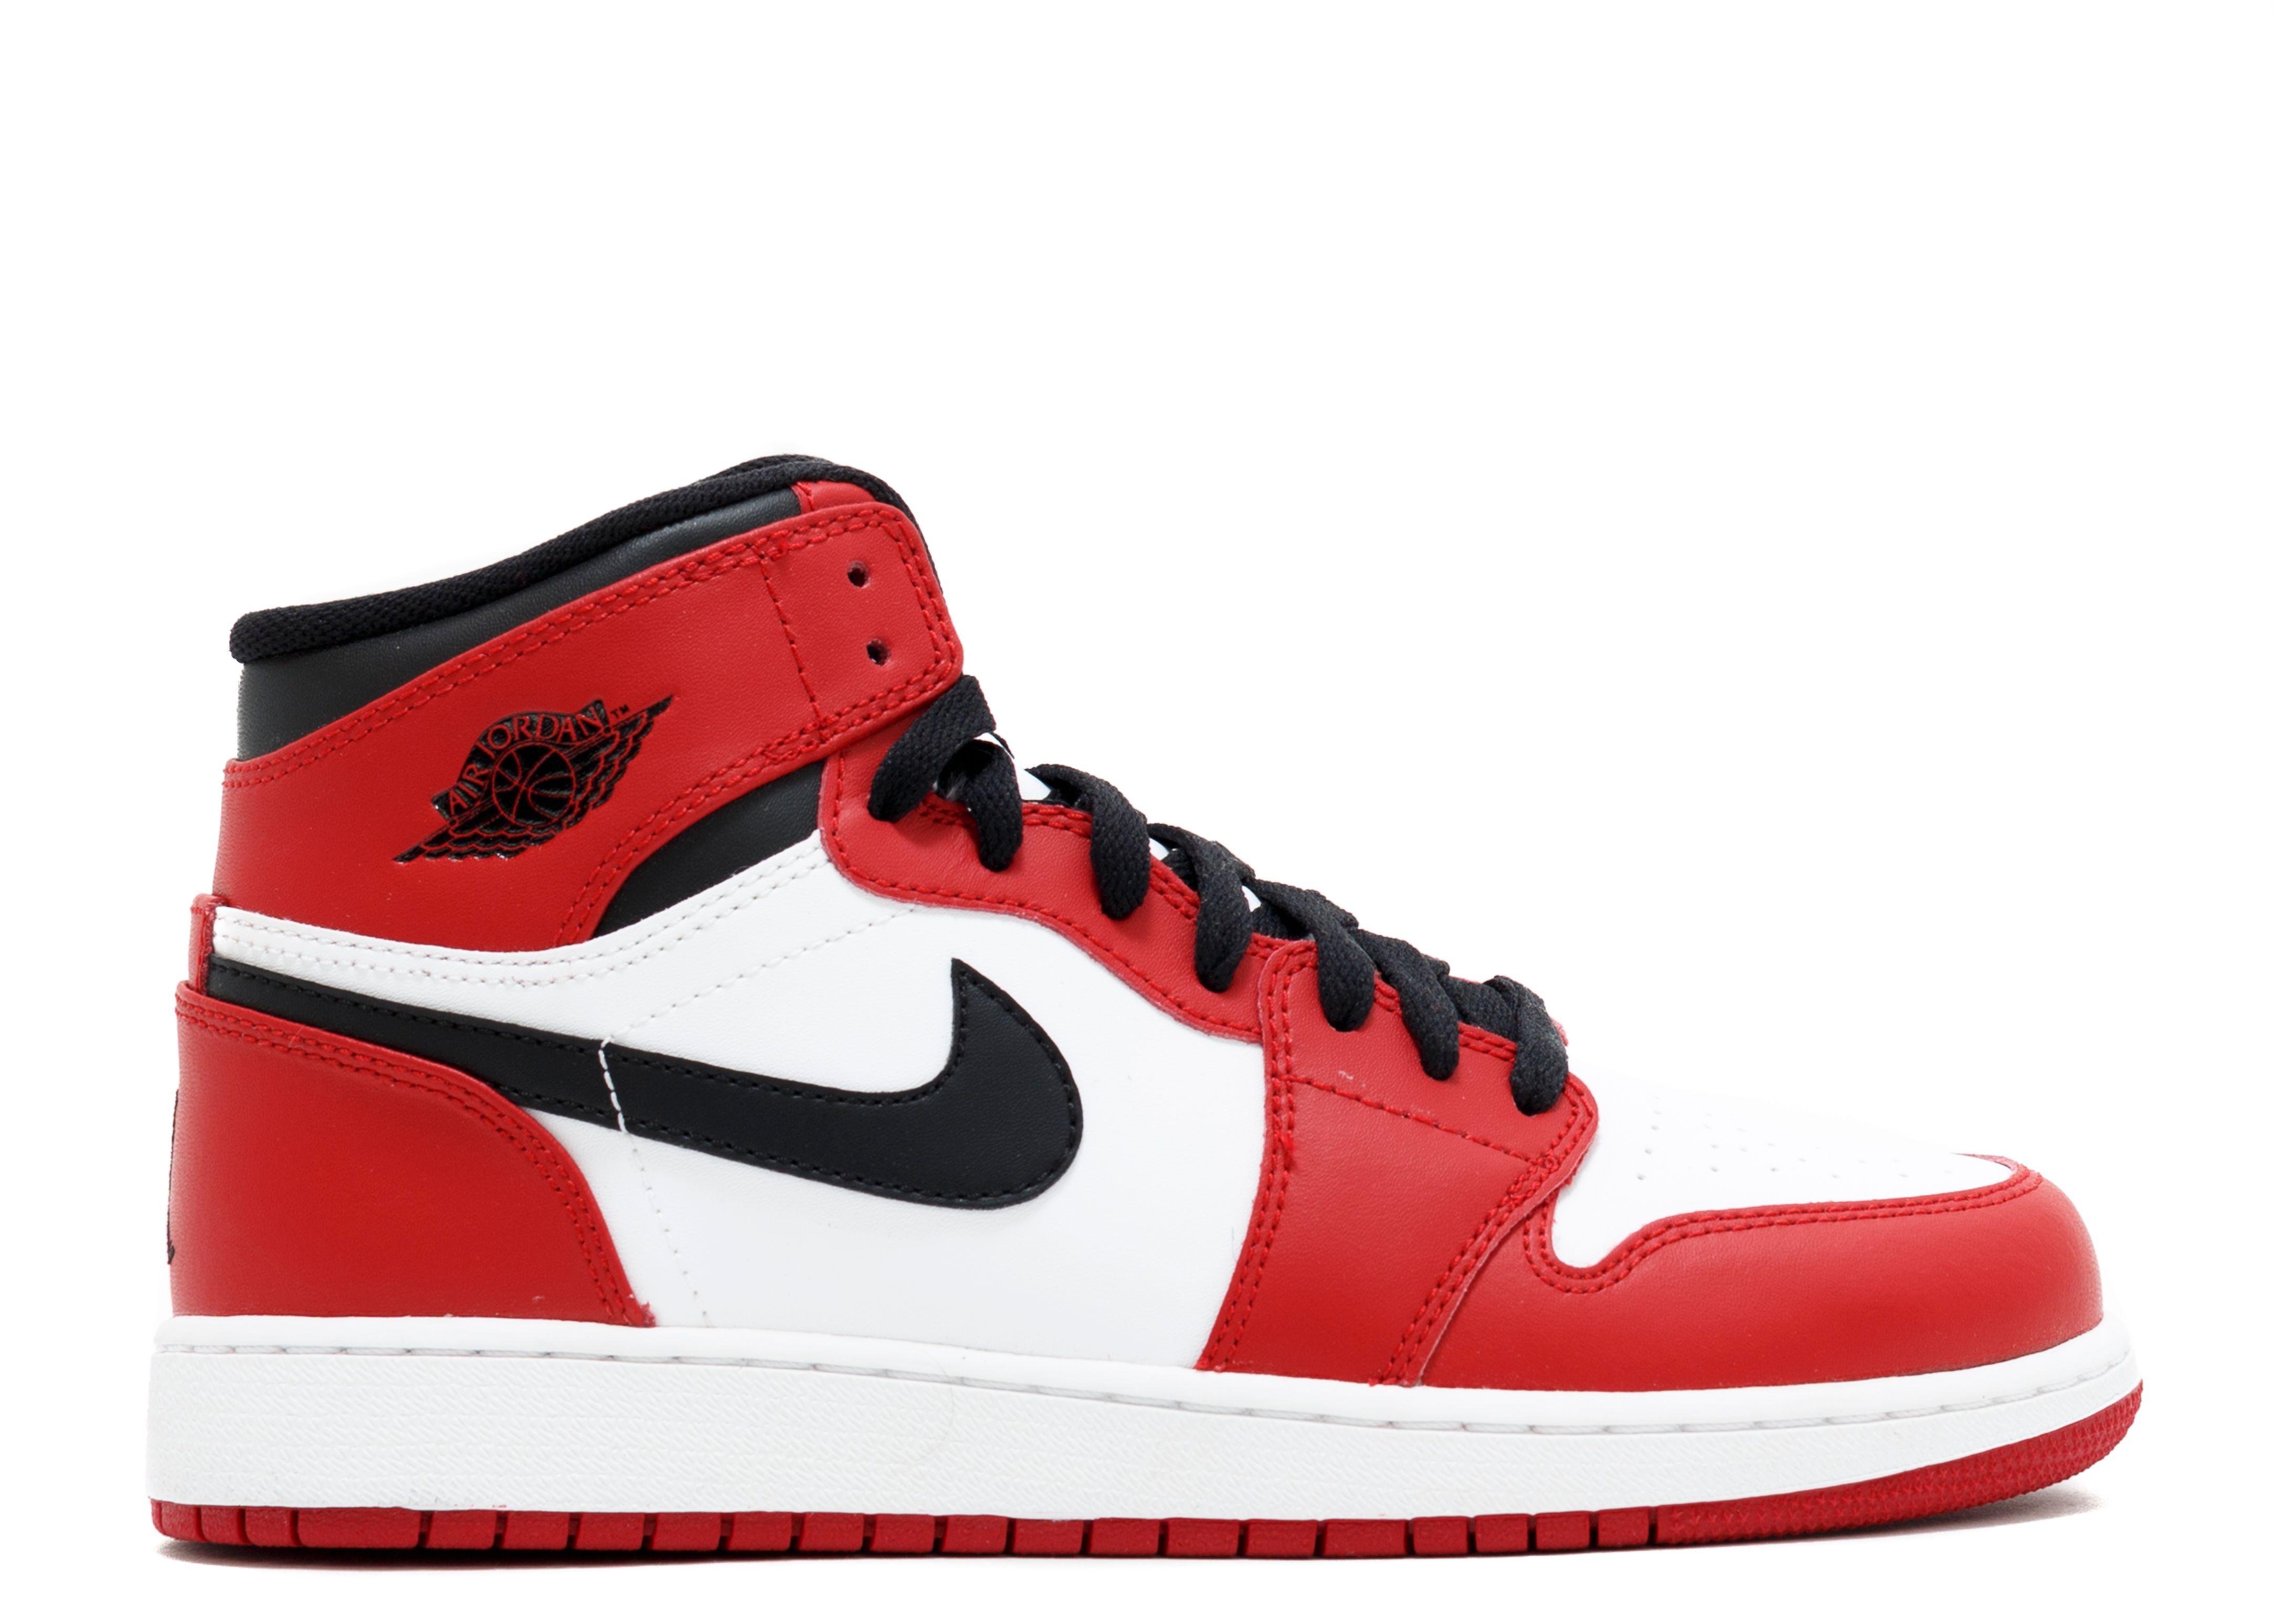 red black and white high top jordans